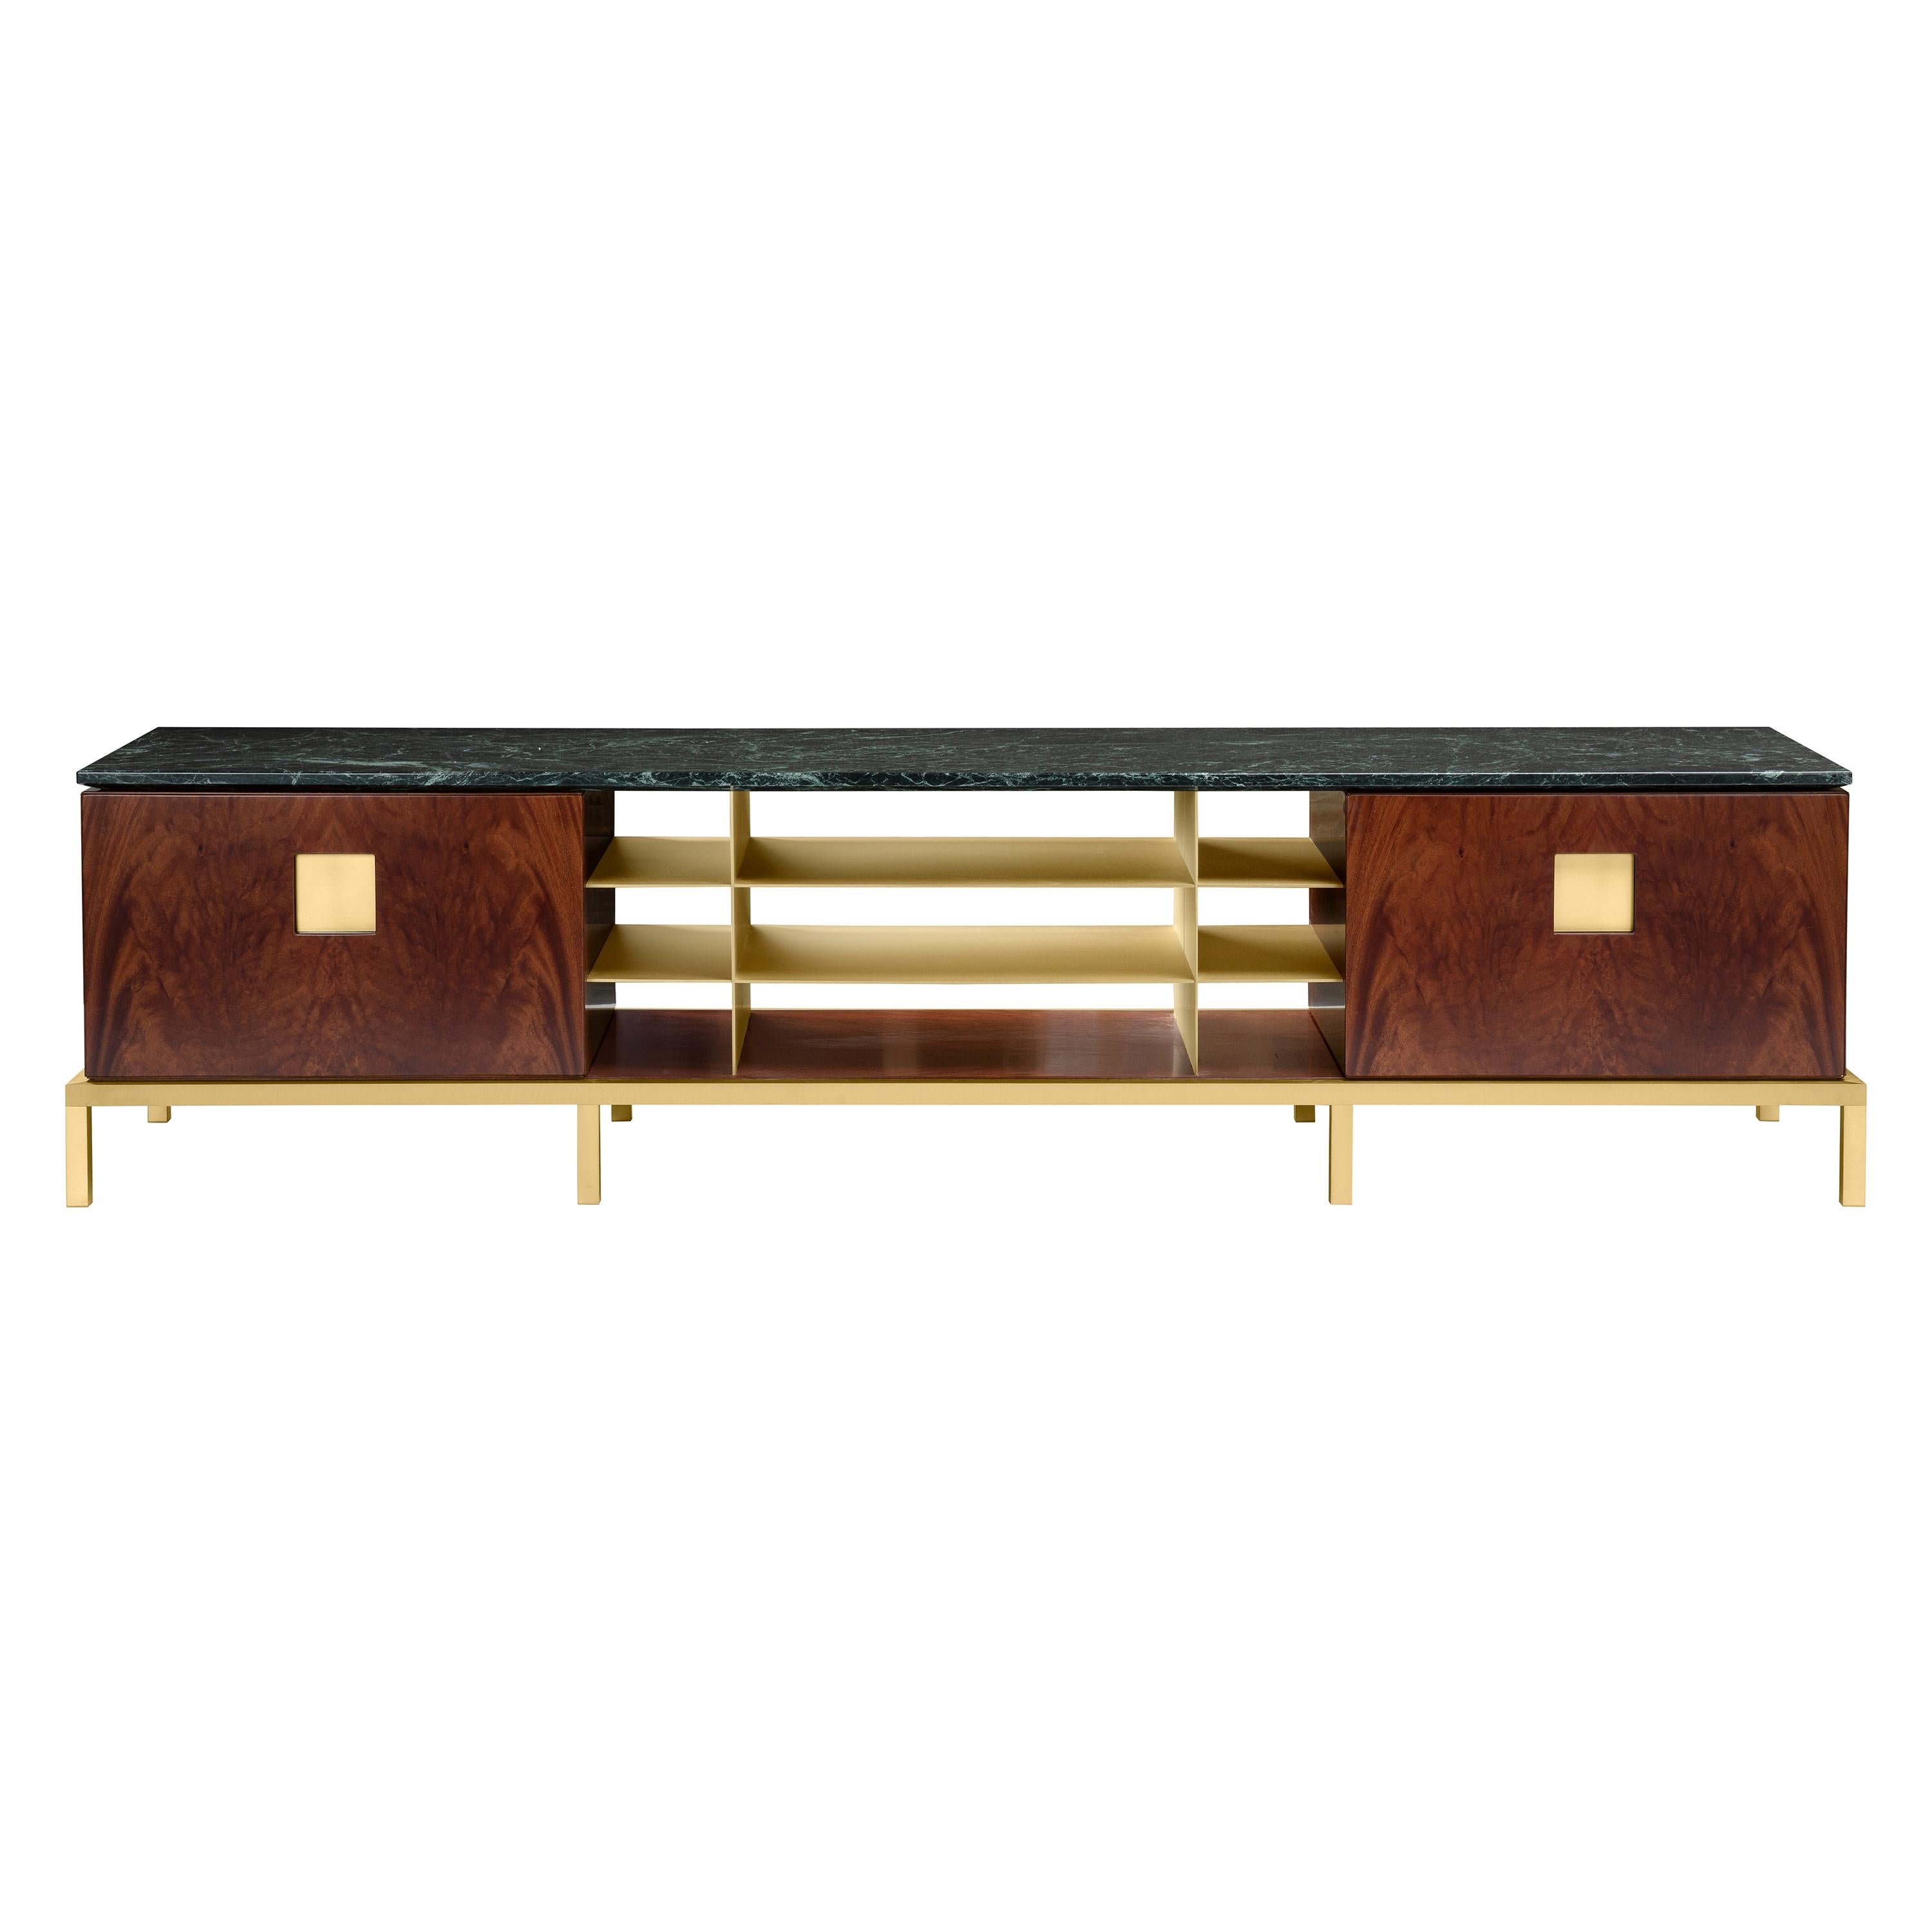 Zuan Living Cabinet in Satin Brass Legs with Mahogany Wood by Paolo Rizzatto